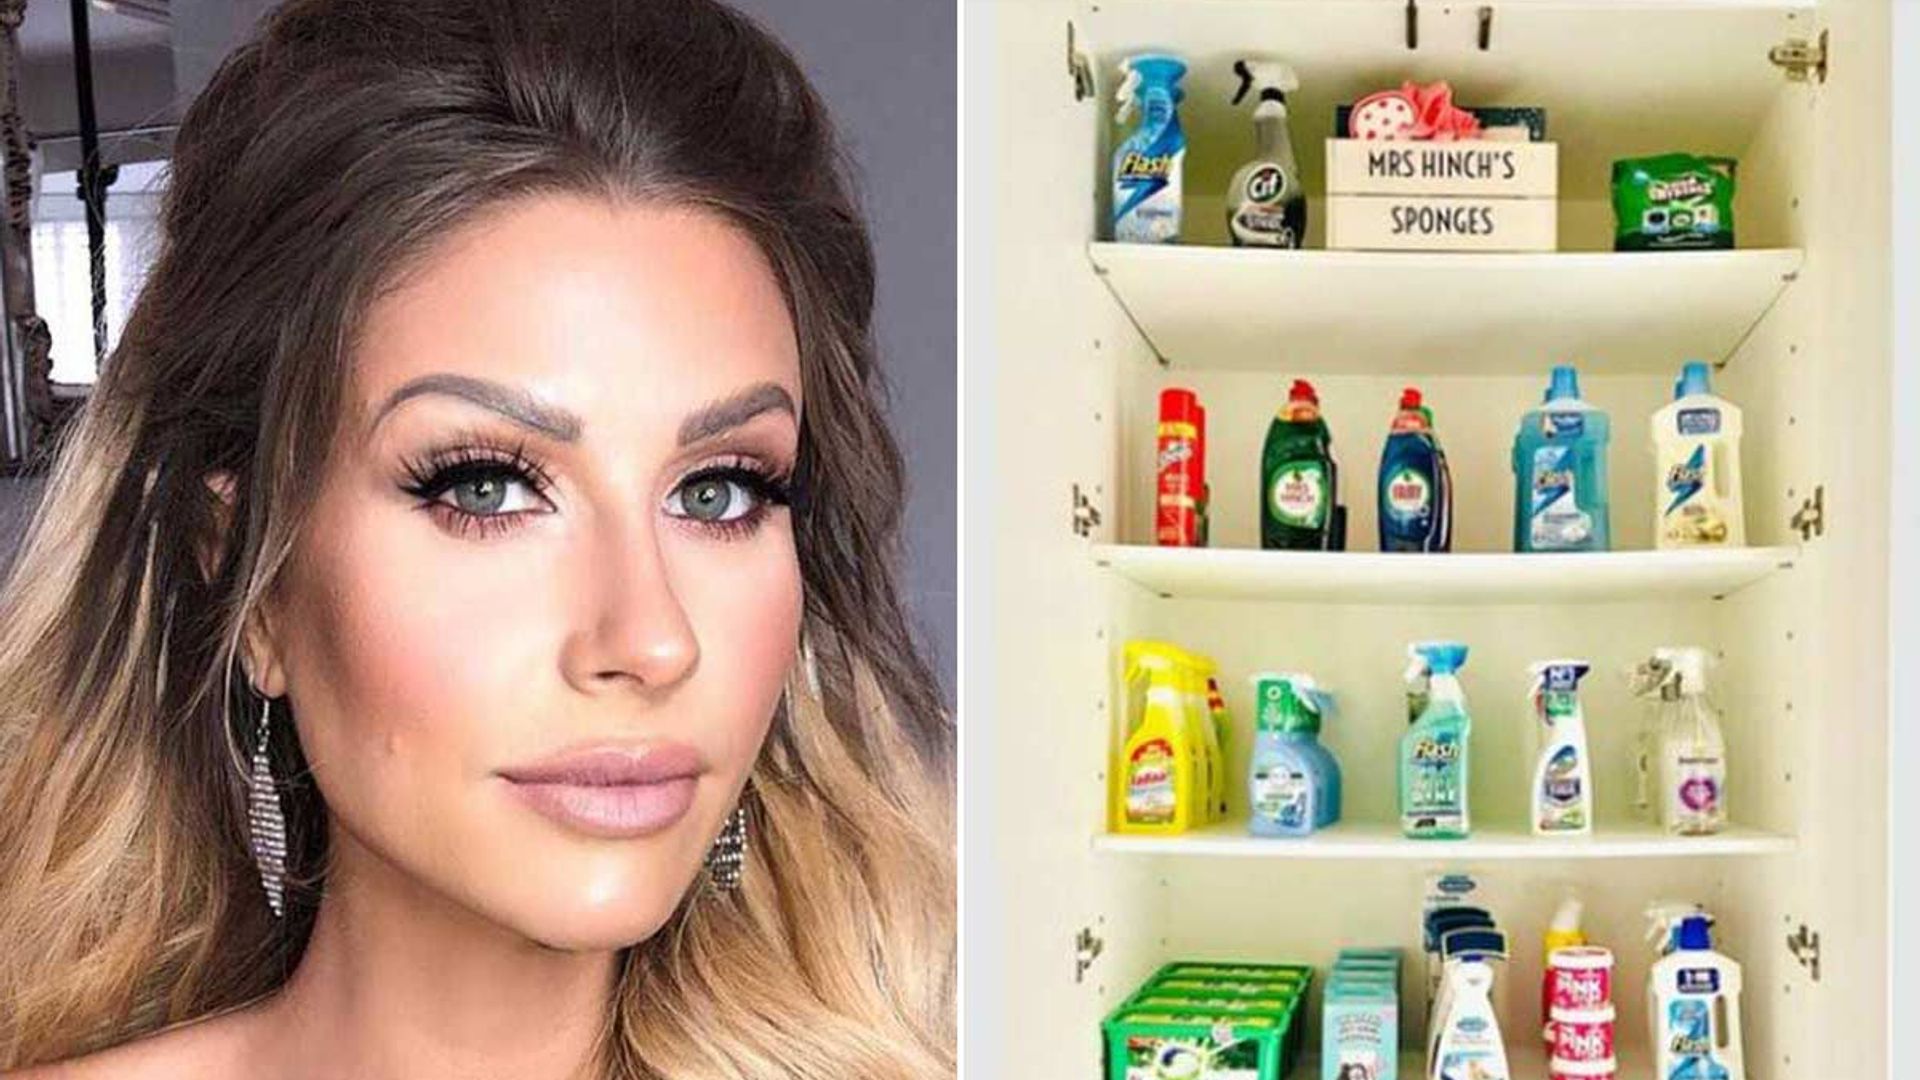 Mrs Hinch reveals secret cupboard after fans desperate to see inside